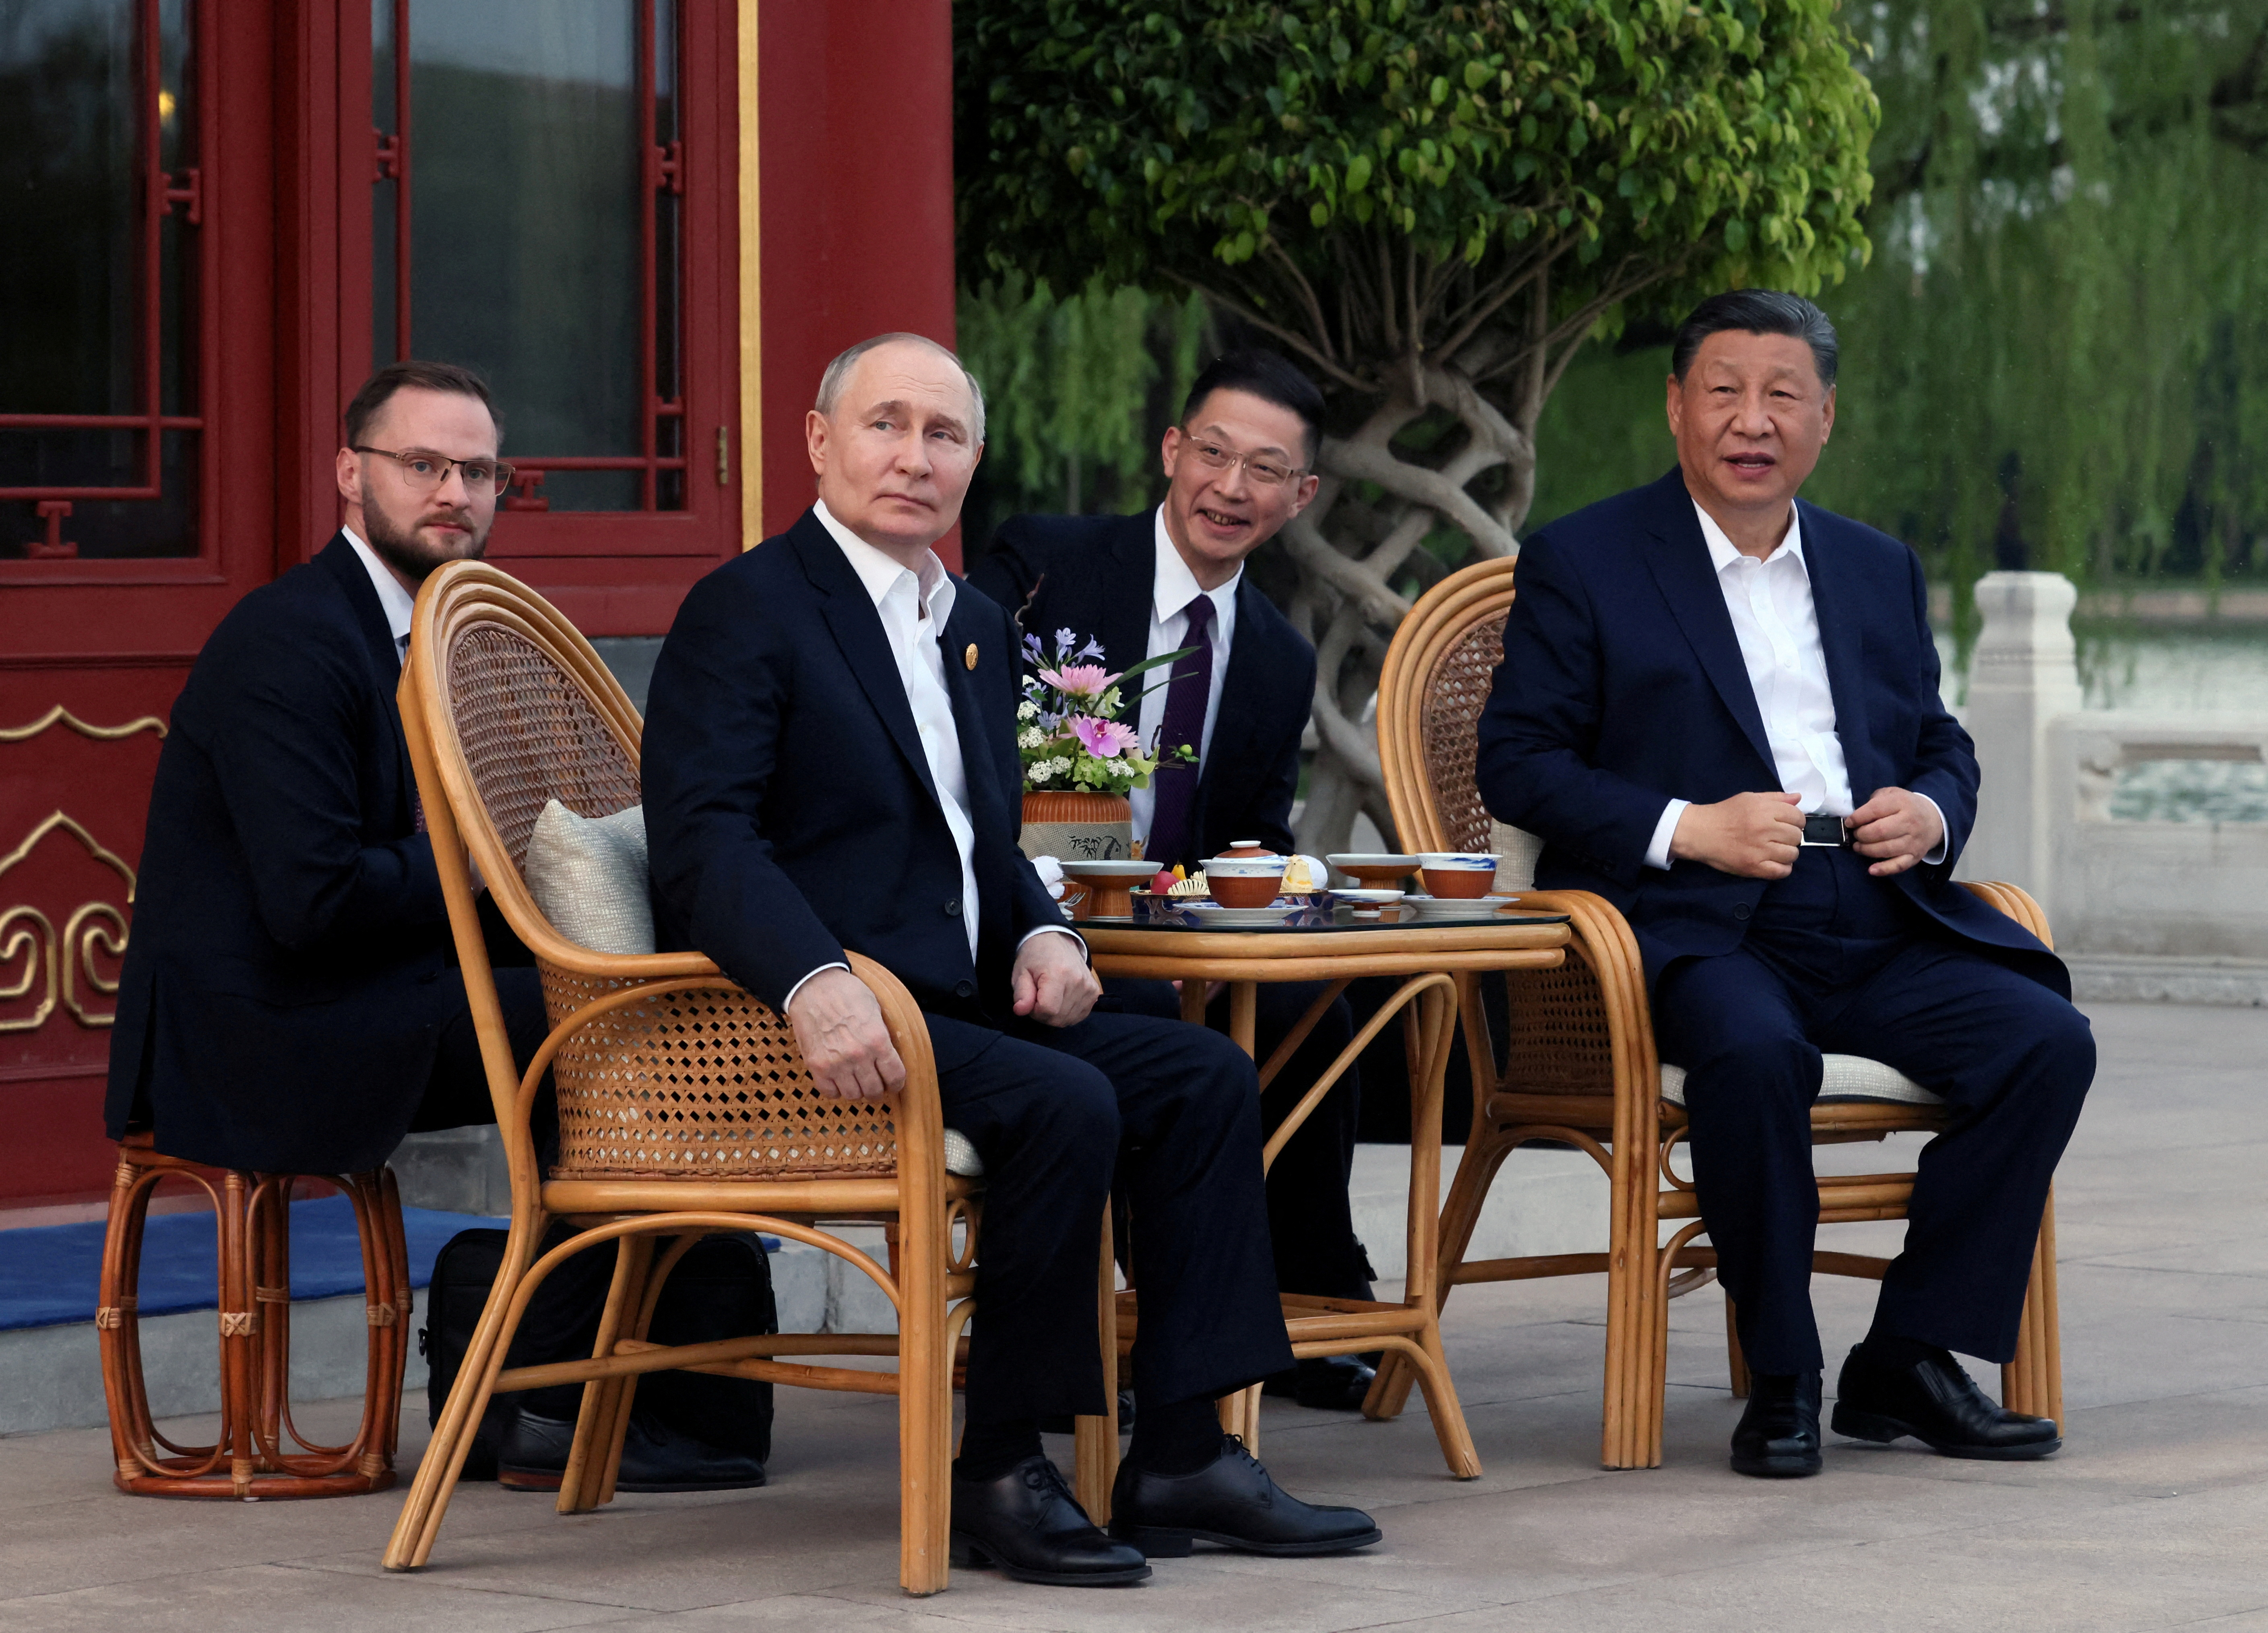 Putin and Xi wrap up talks with tea ceremony in a Beijing park